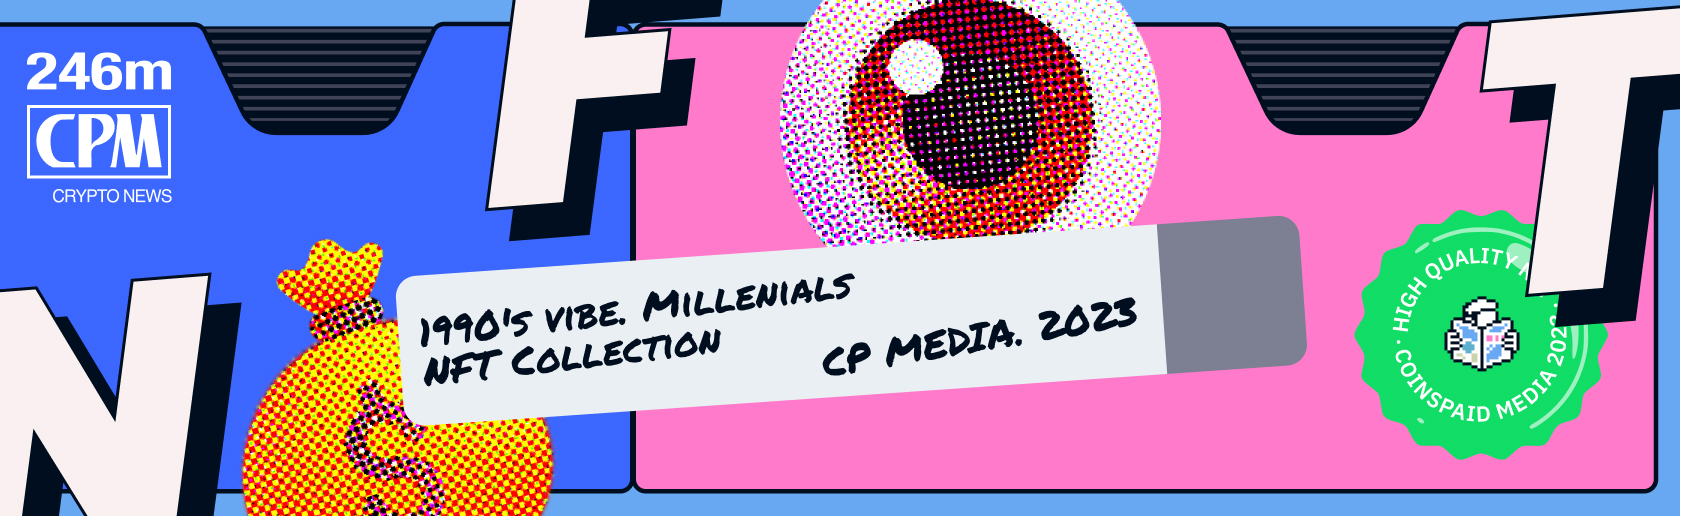 Who Are the CP Media Millennials?